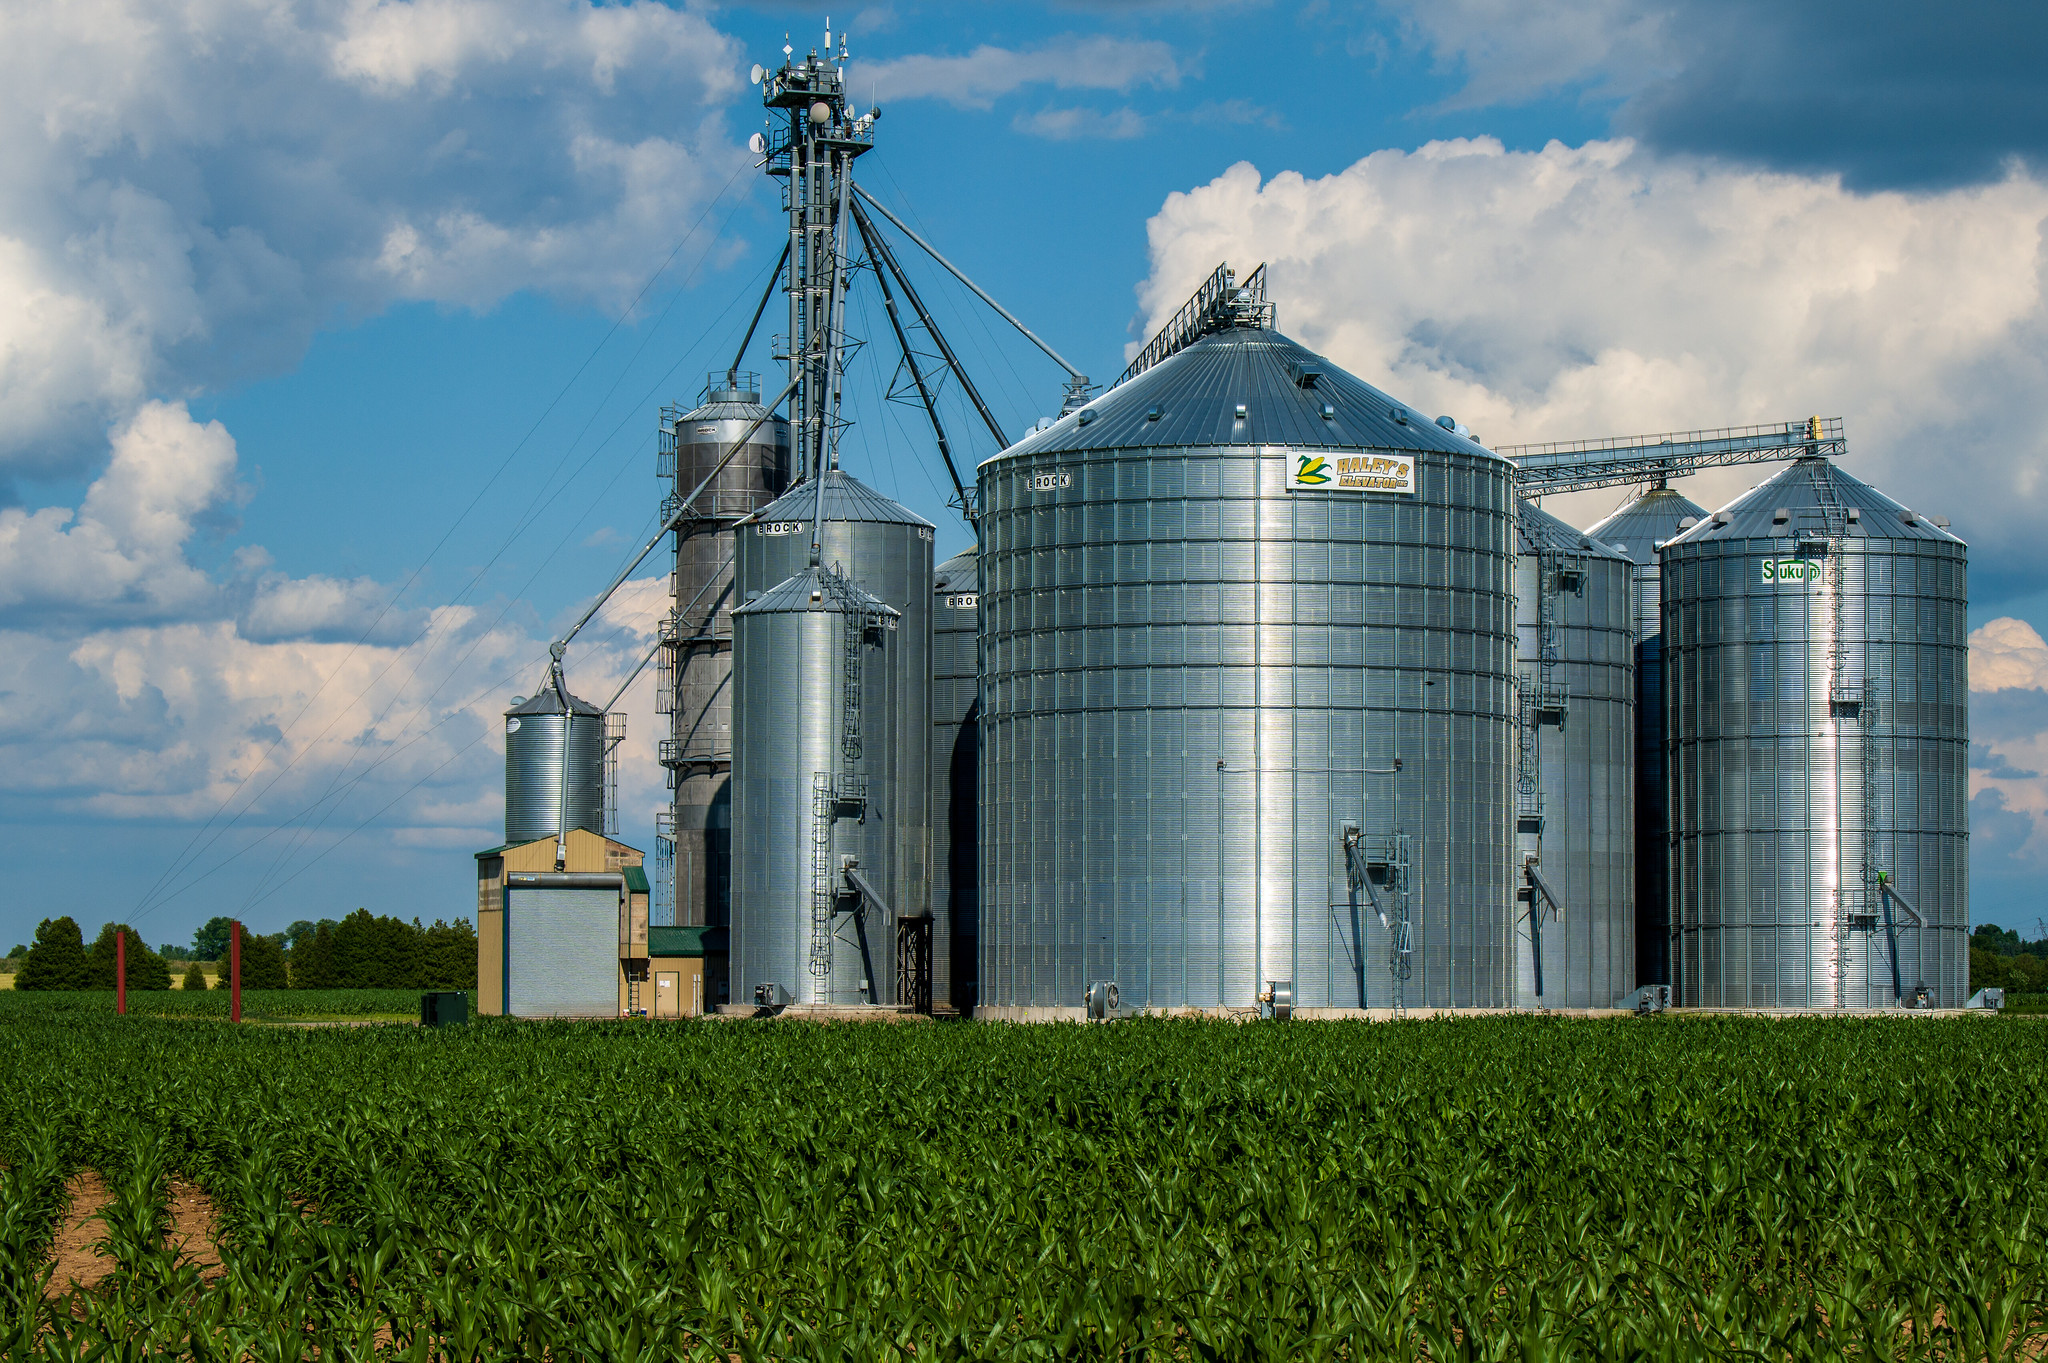 Data-Driven Analysis of Farm Practices in the Midwest